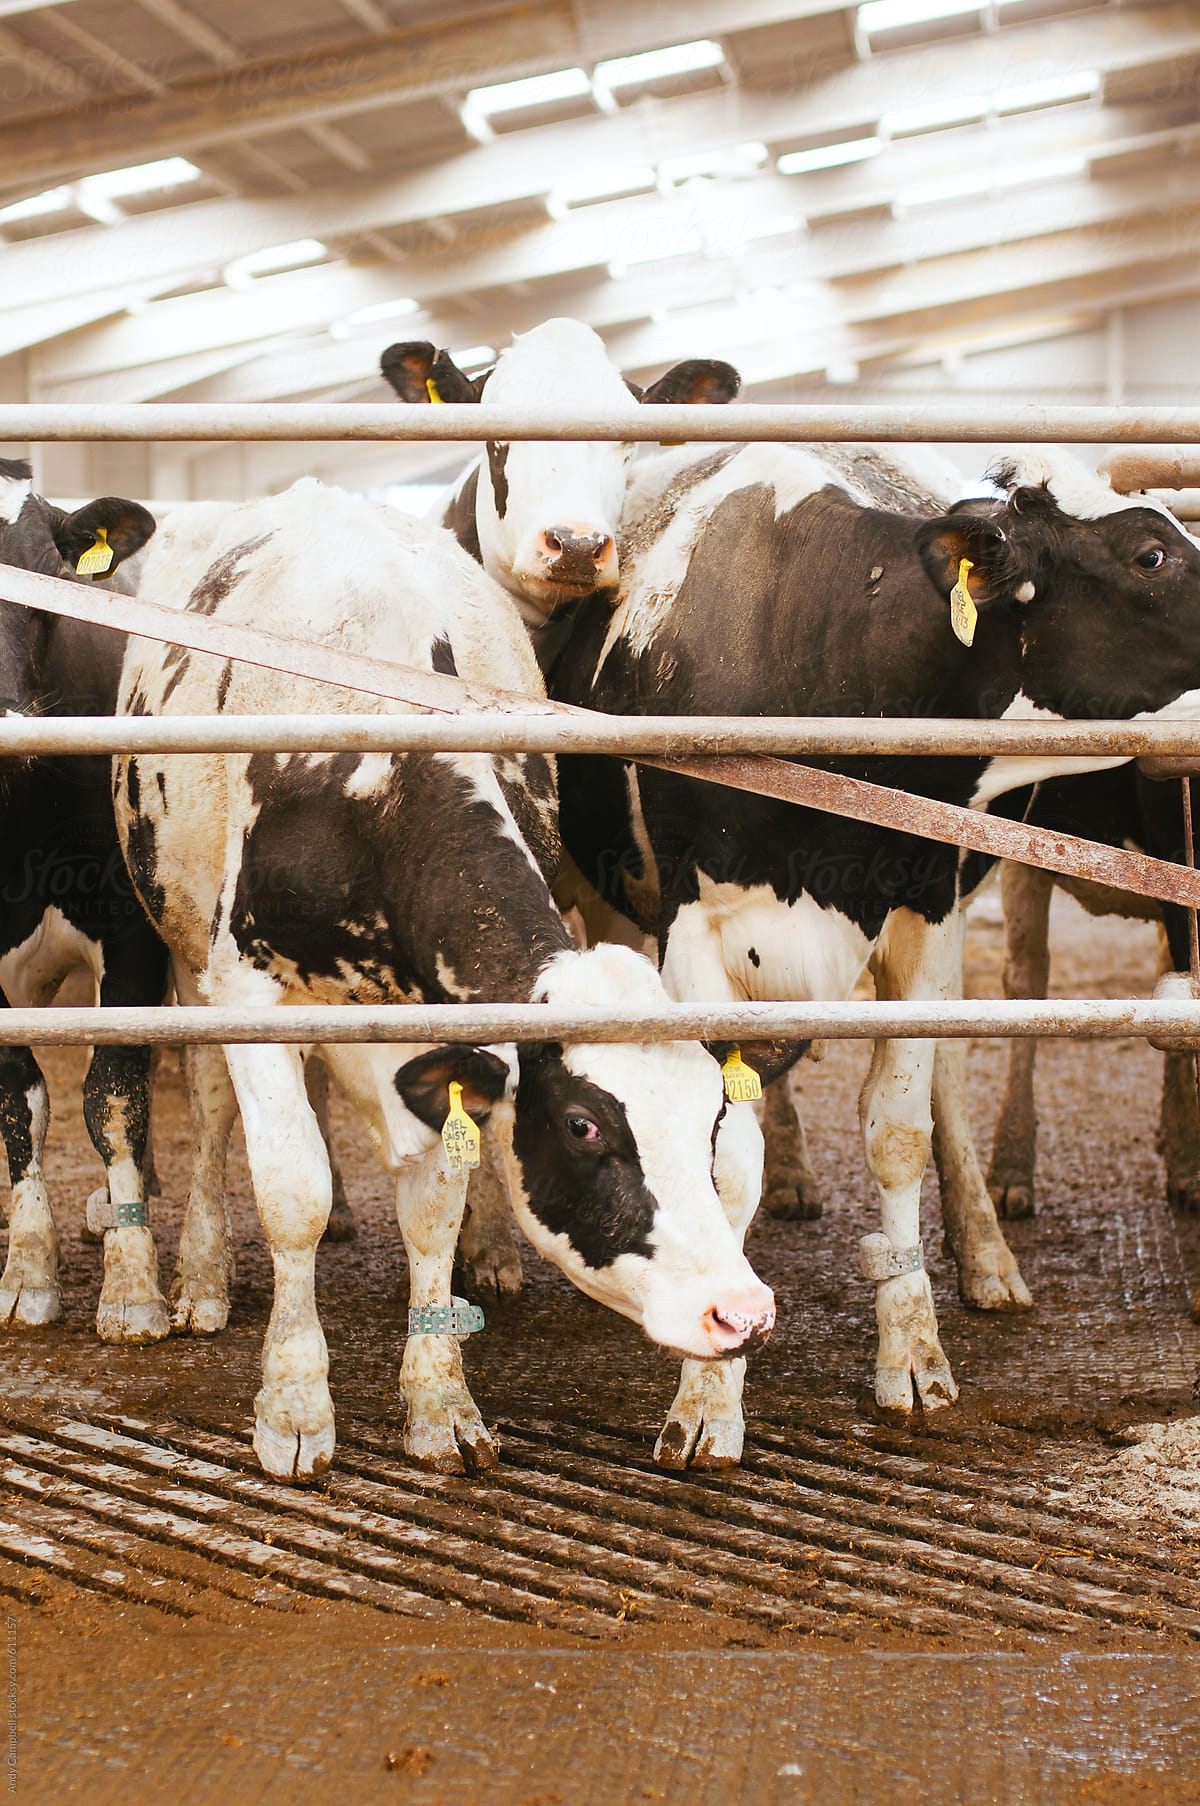 A herd of cattle stand in a farm warehouse